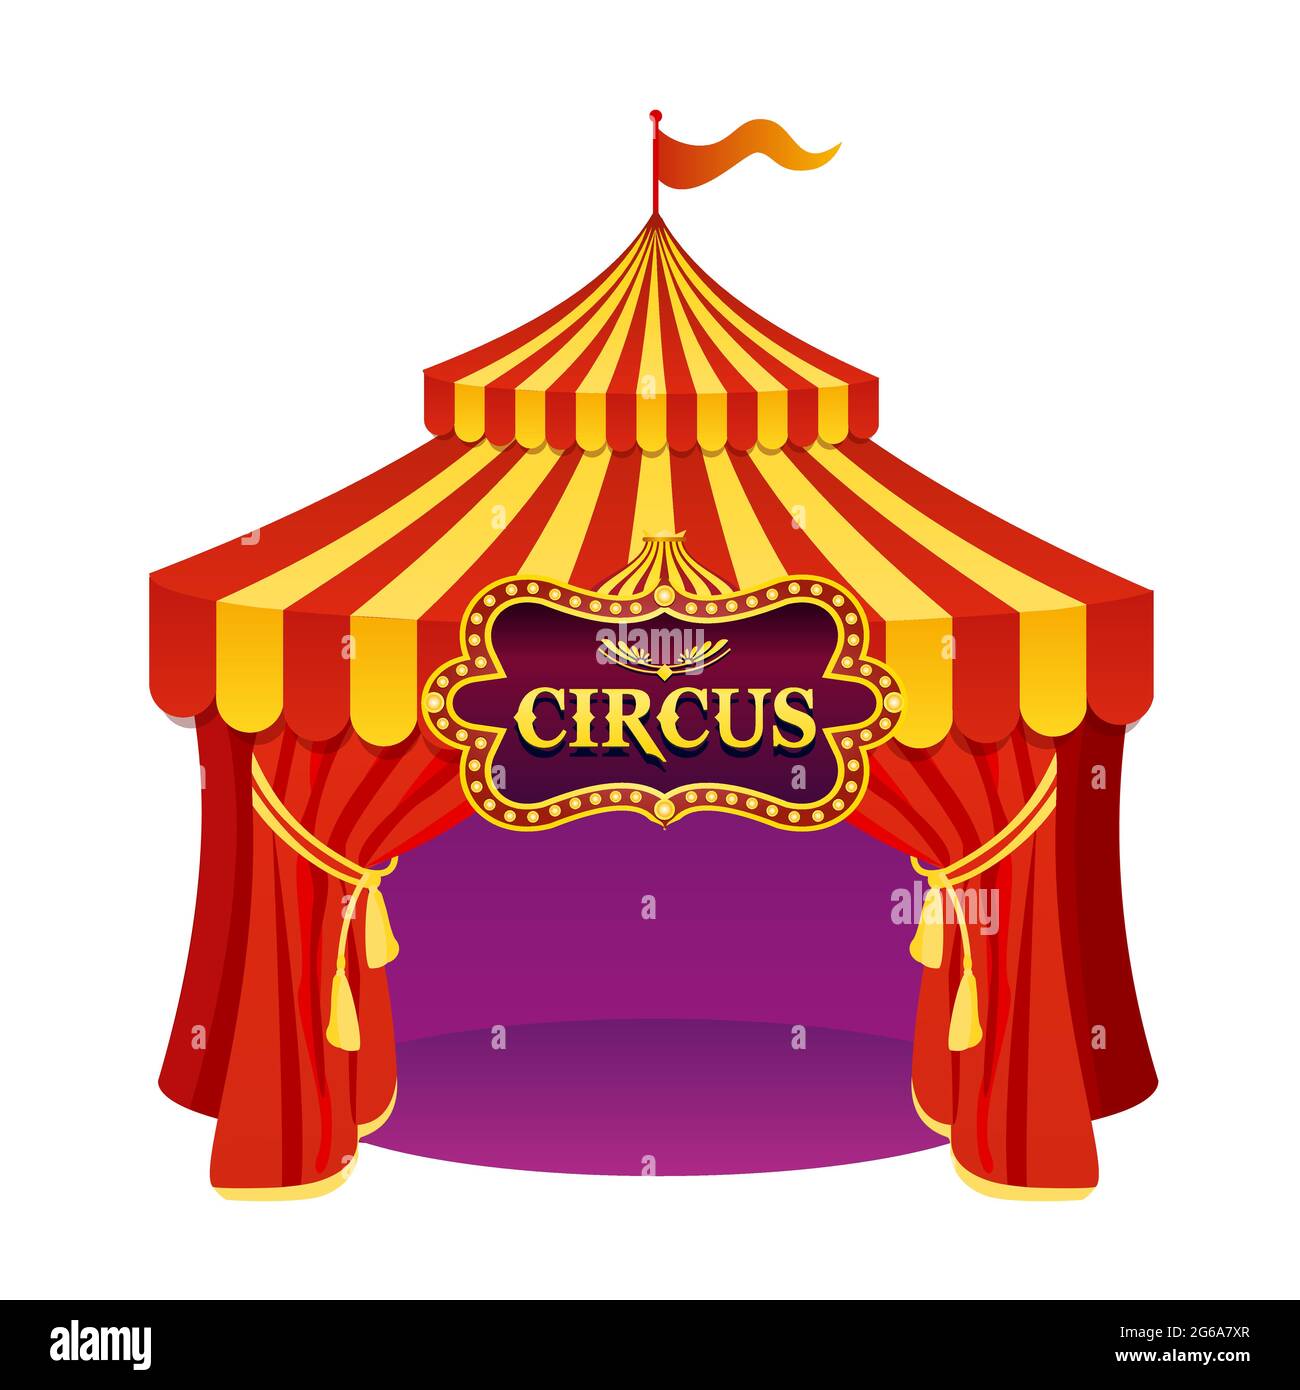 Vector illustration of bright colors circus tent with beautiful emblem isolated on white background. Stock Vector